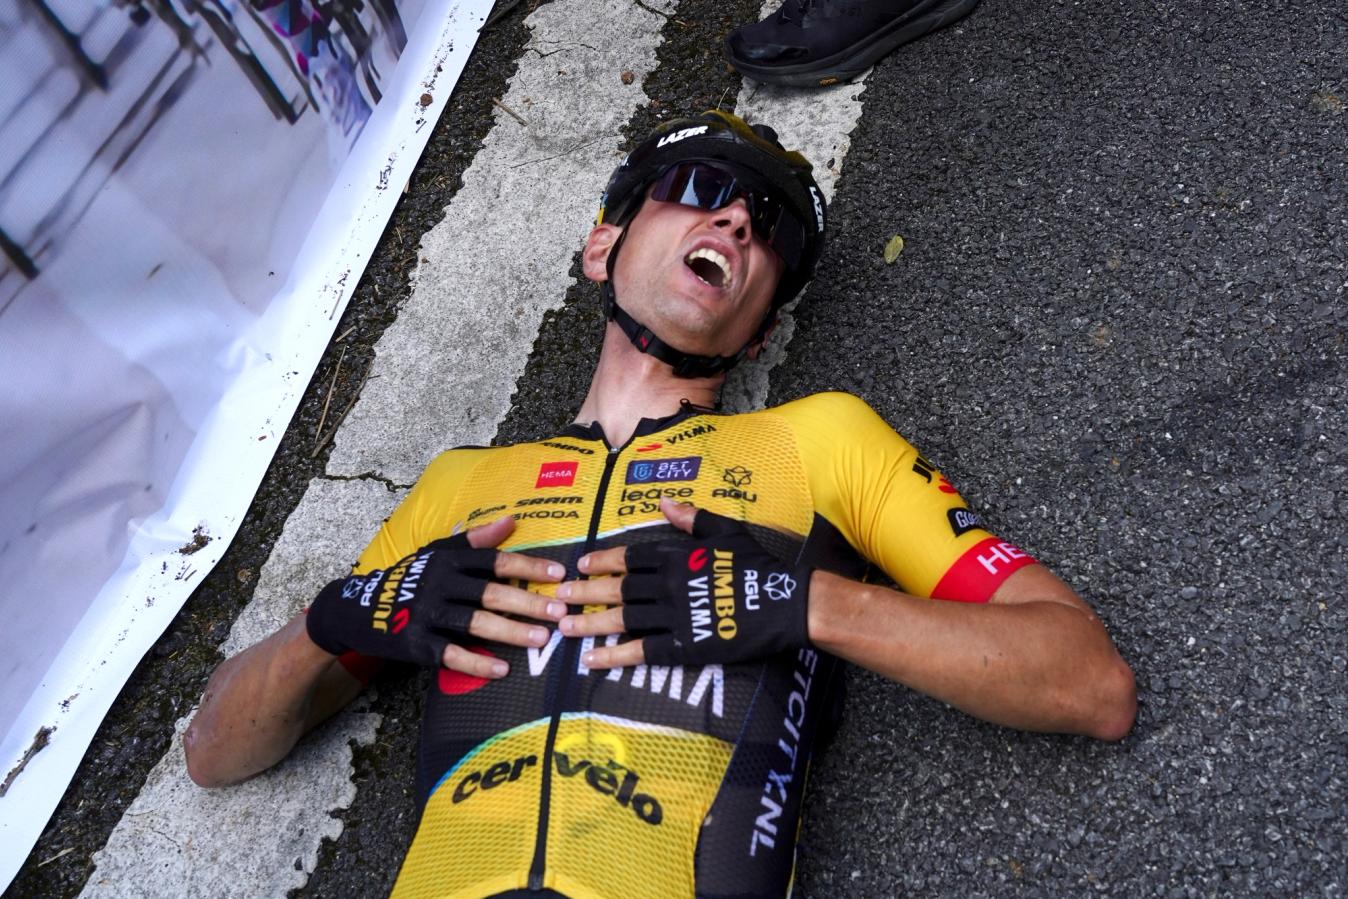 Delighted but exhausted, Milan Vader recovered on the ground after the line, before being helped to his feet by Jumbo-Visma teammate Steven Kruijswijk